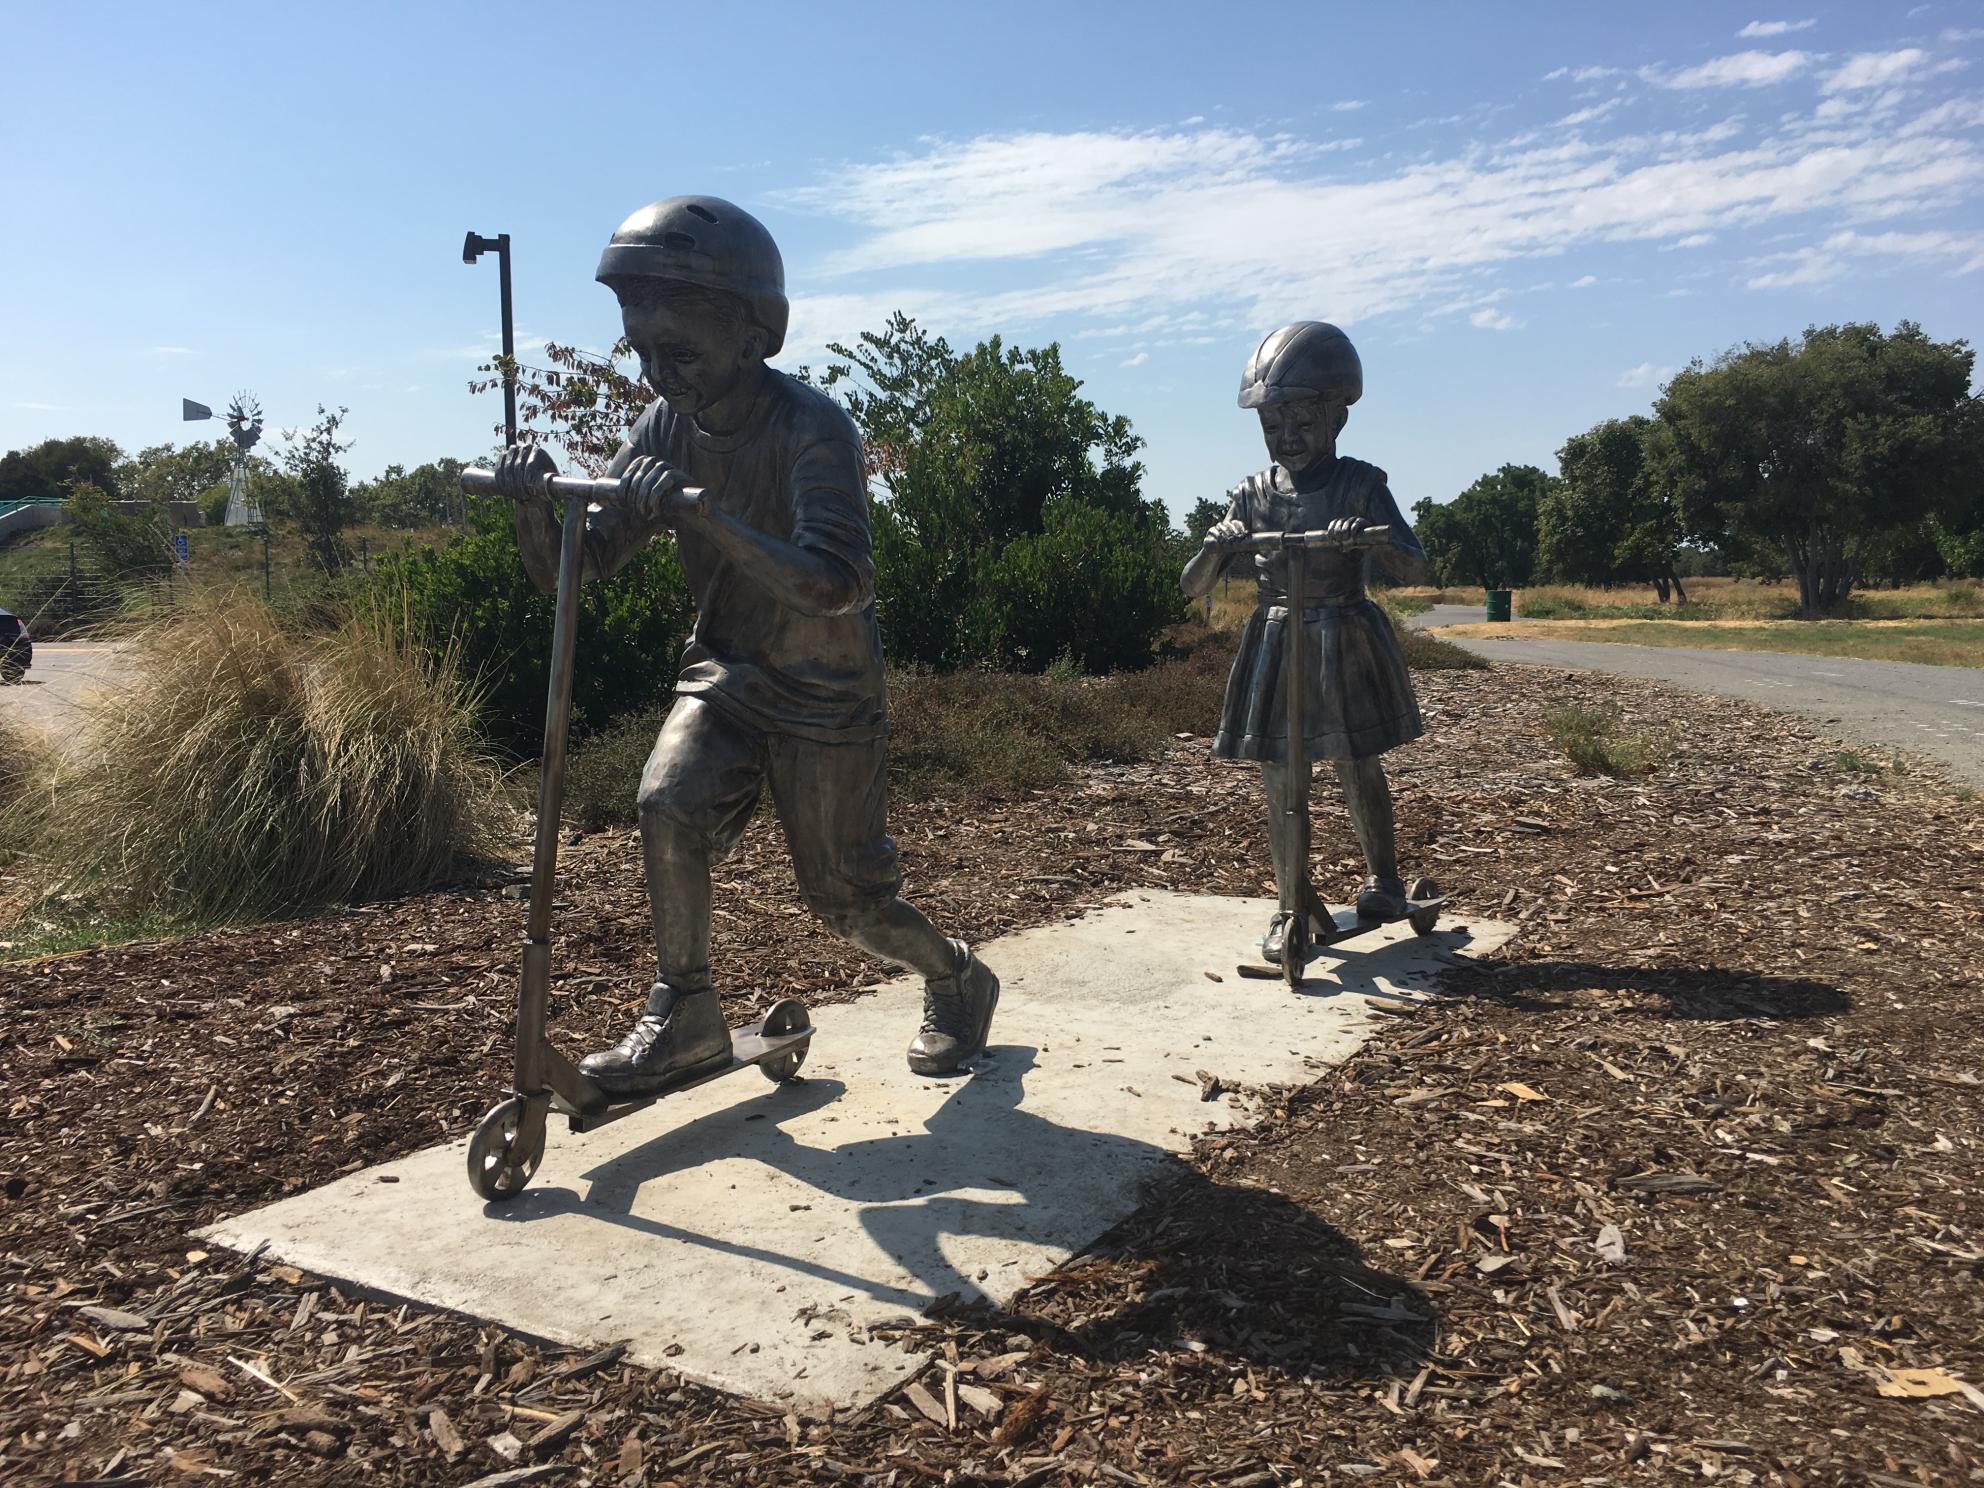 Children's Rotary Sculpture Walk Statues - Children on Scooters